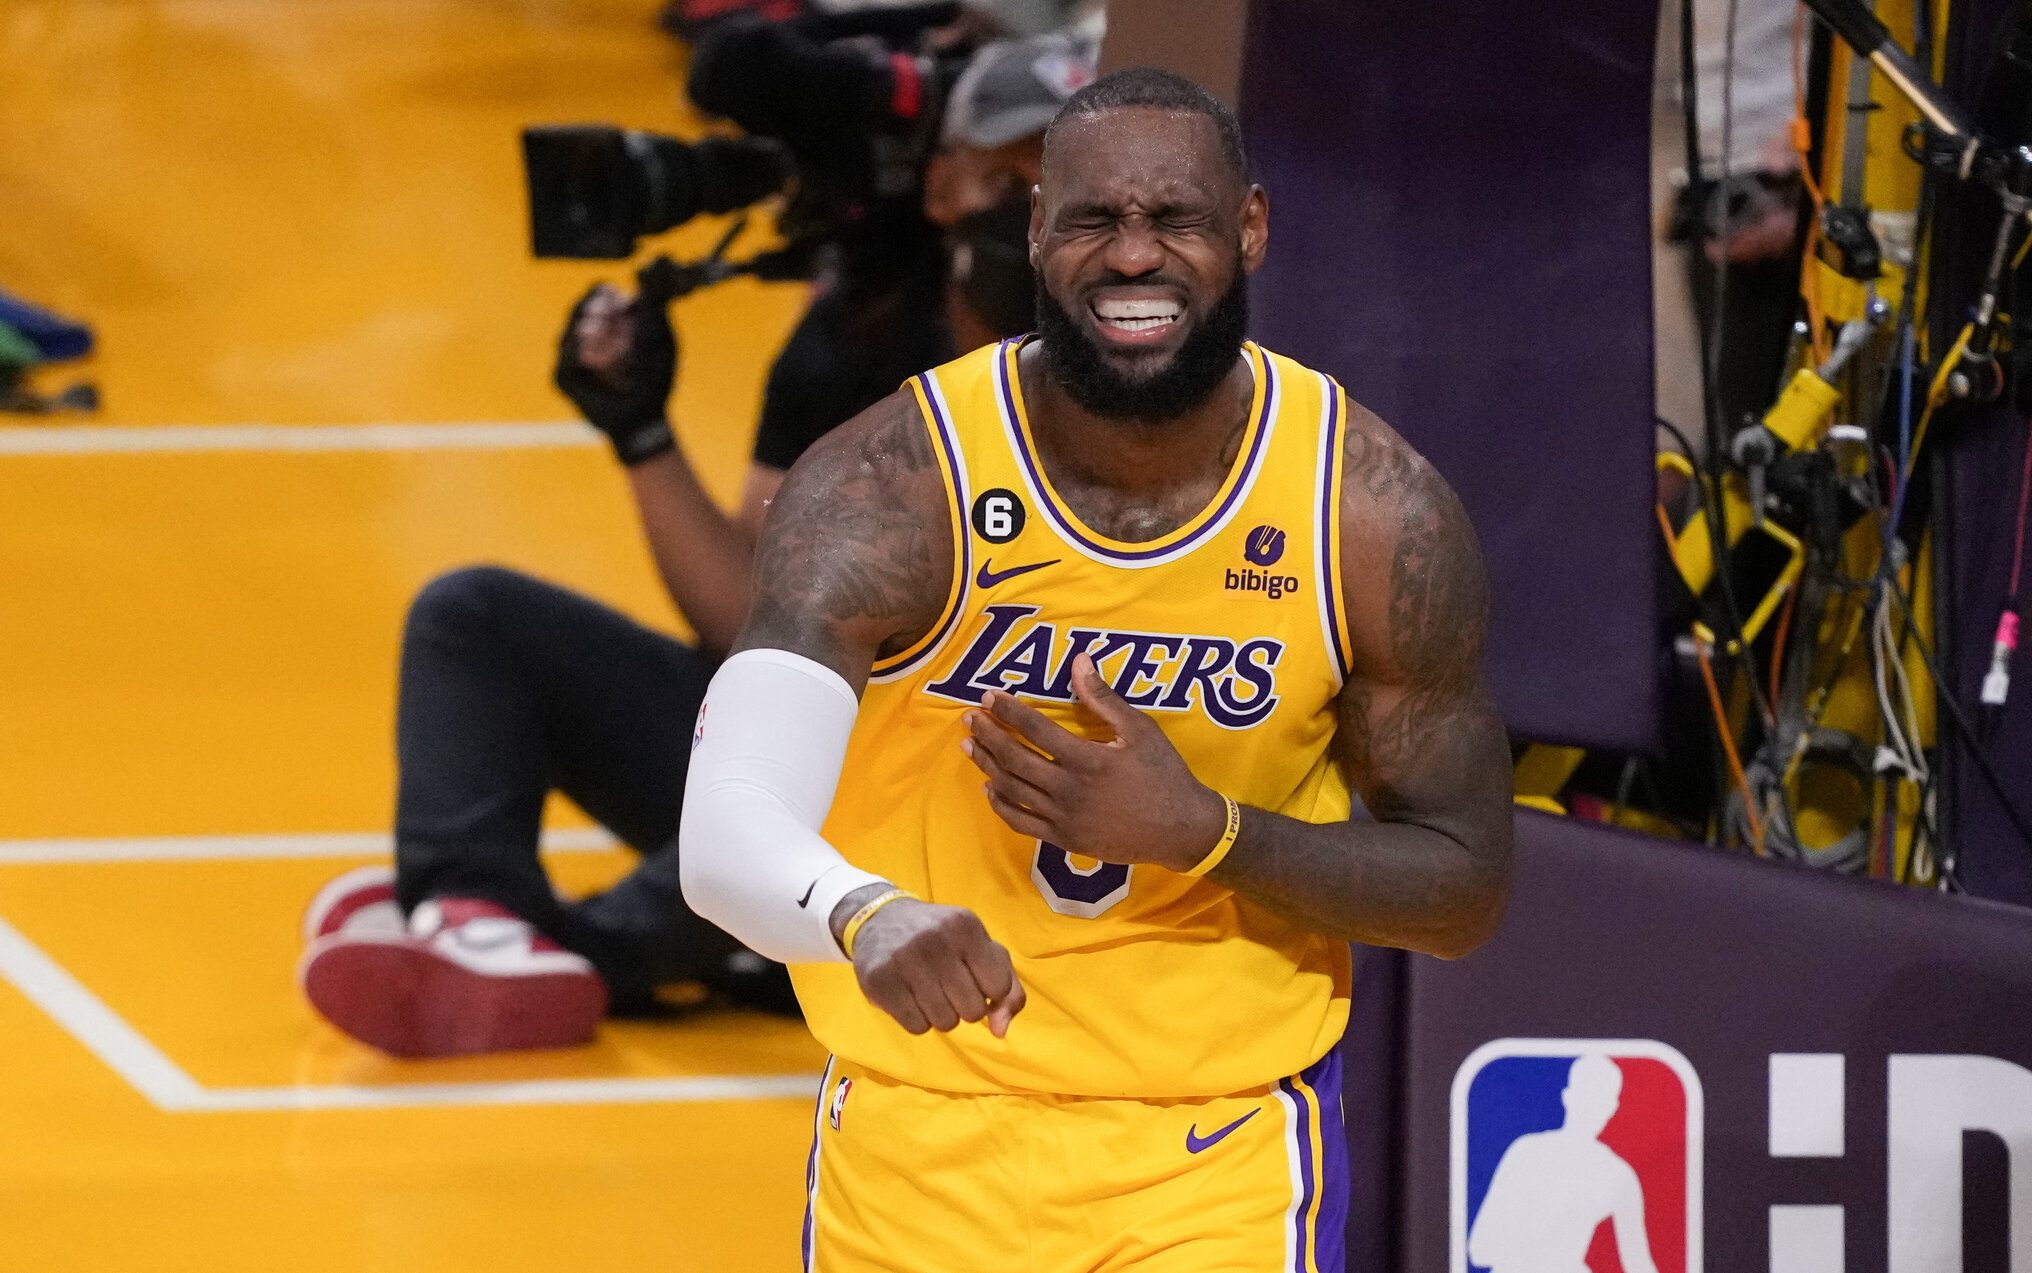 Lakers to speak with LeBron about retirement comment